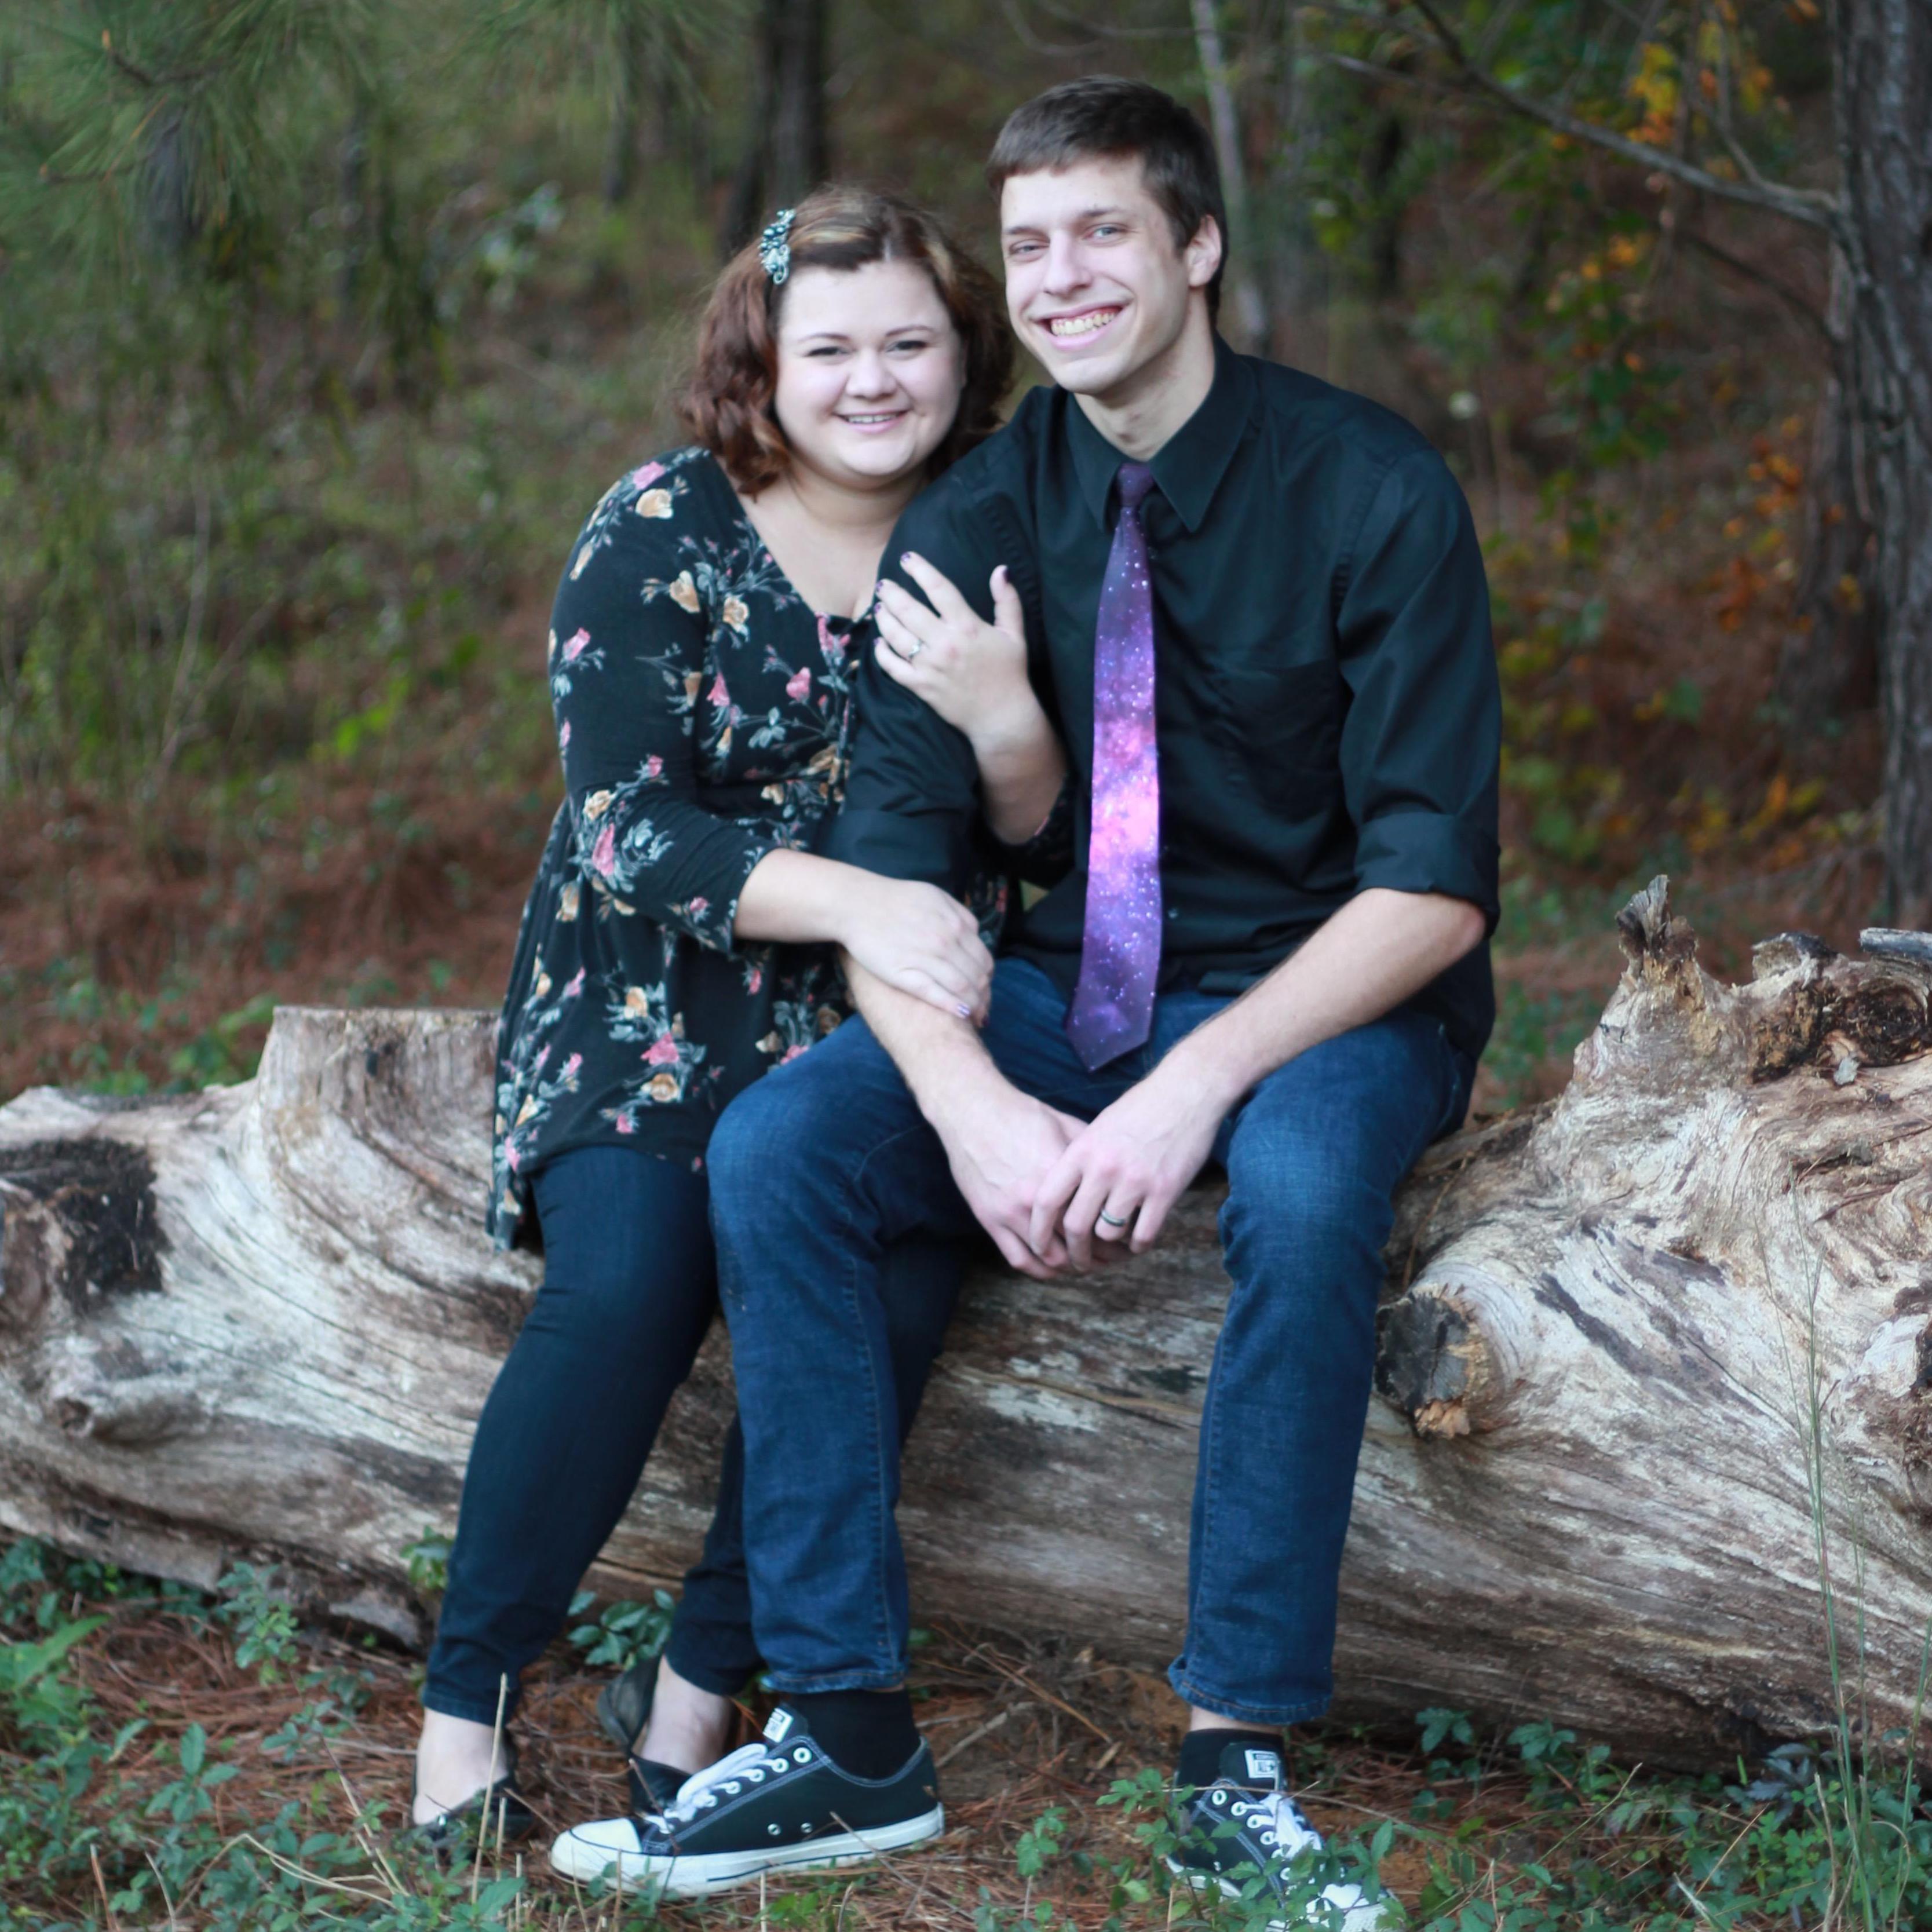 This was taken when JT's sister, Rebekah, took our awesome engagement photos.